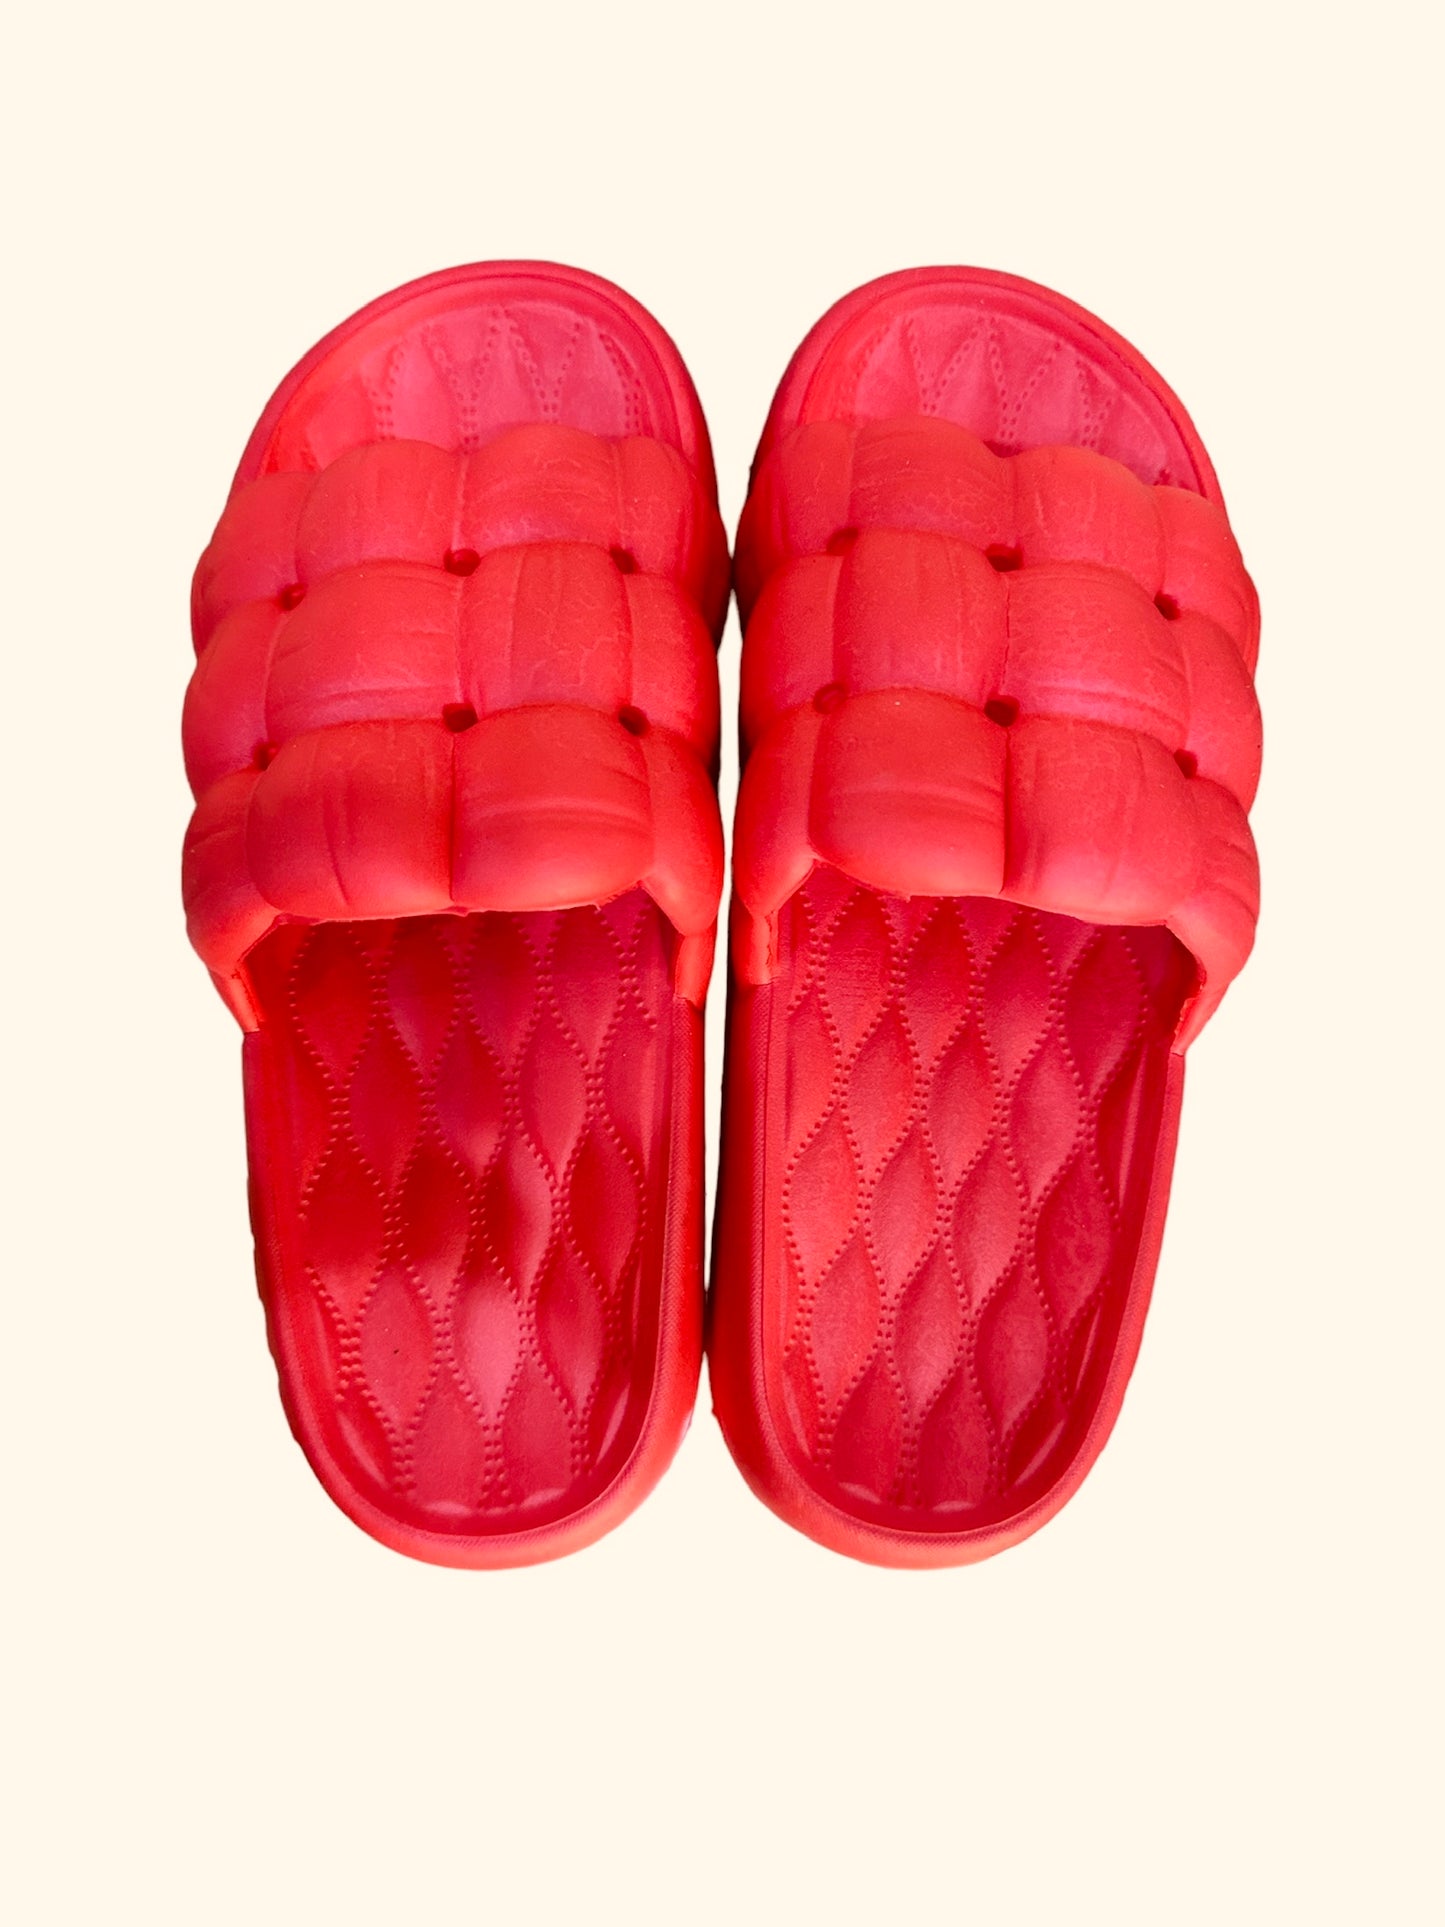 Puffy Soft Sole Slippers - RED